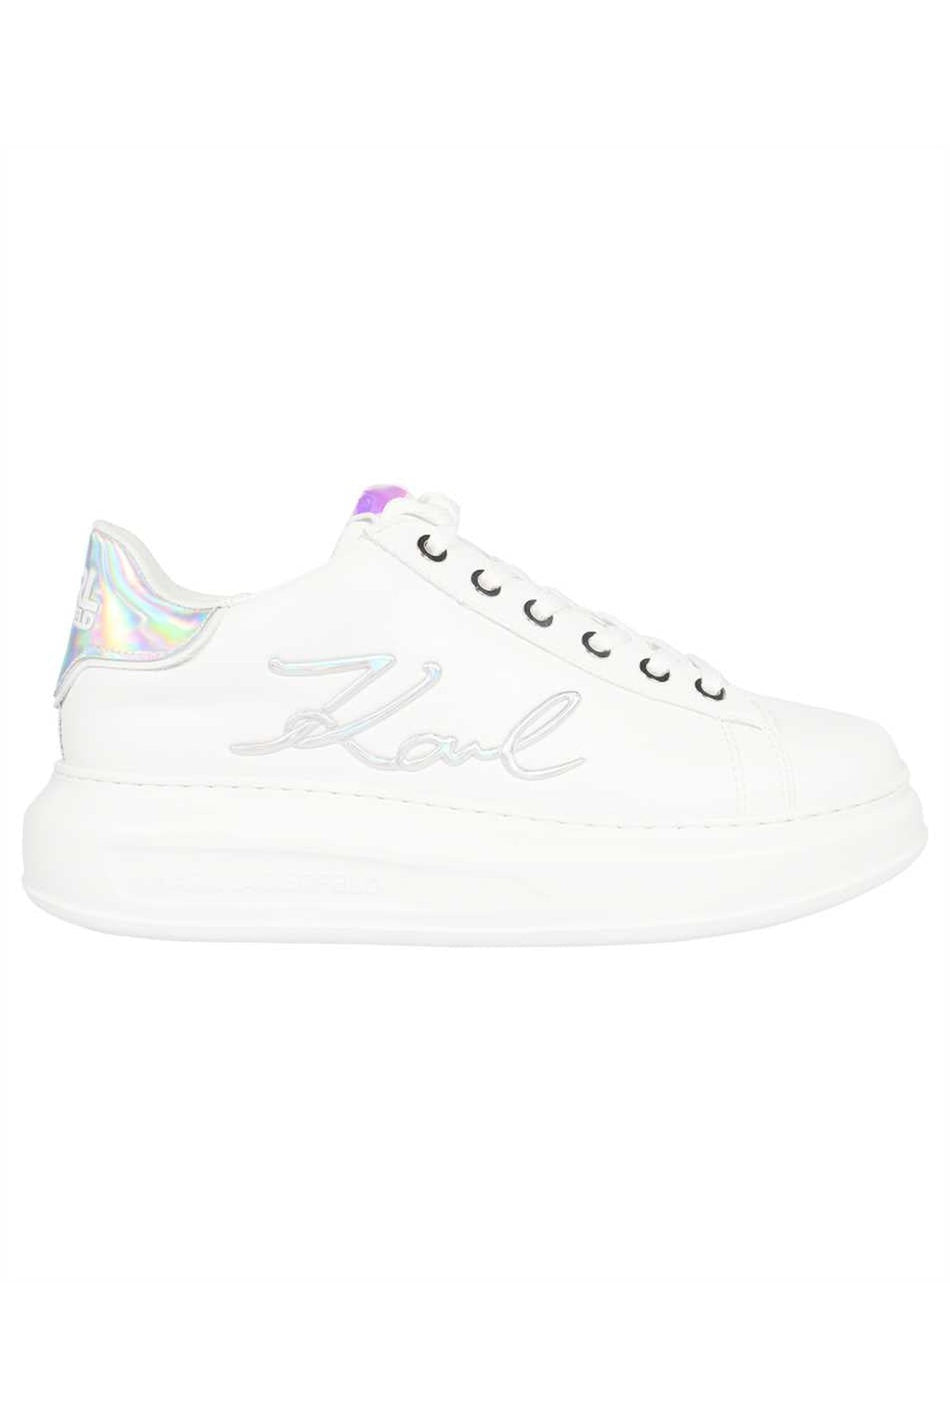 Low-top sneakers-Karl Lagerfeld-OUTLET-SALE-41-ARCHIVIST